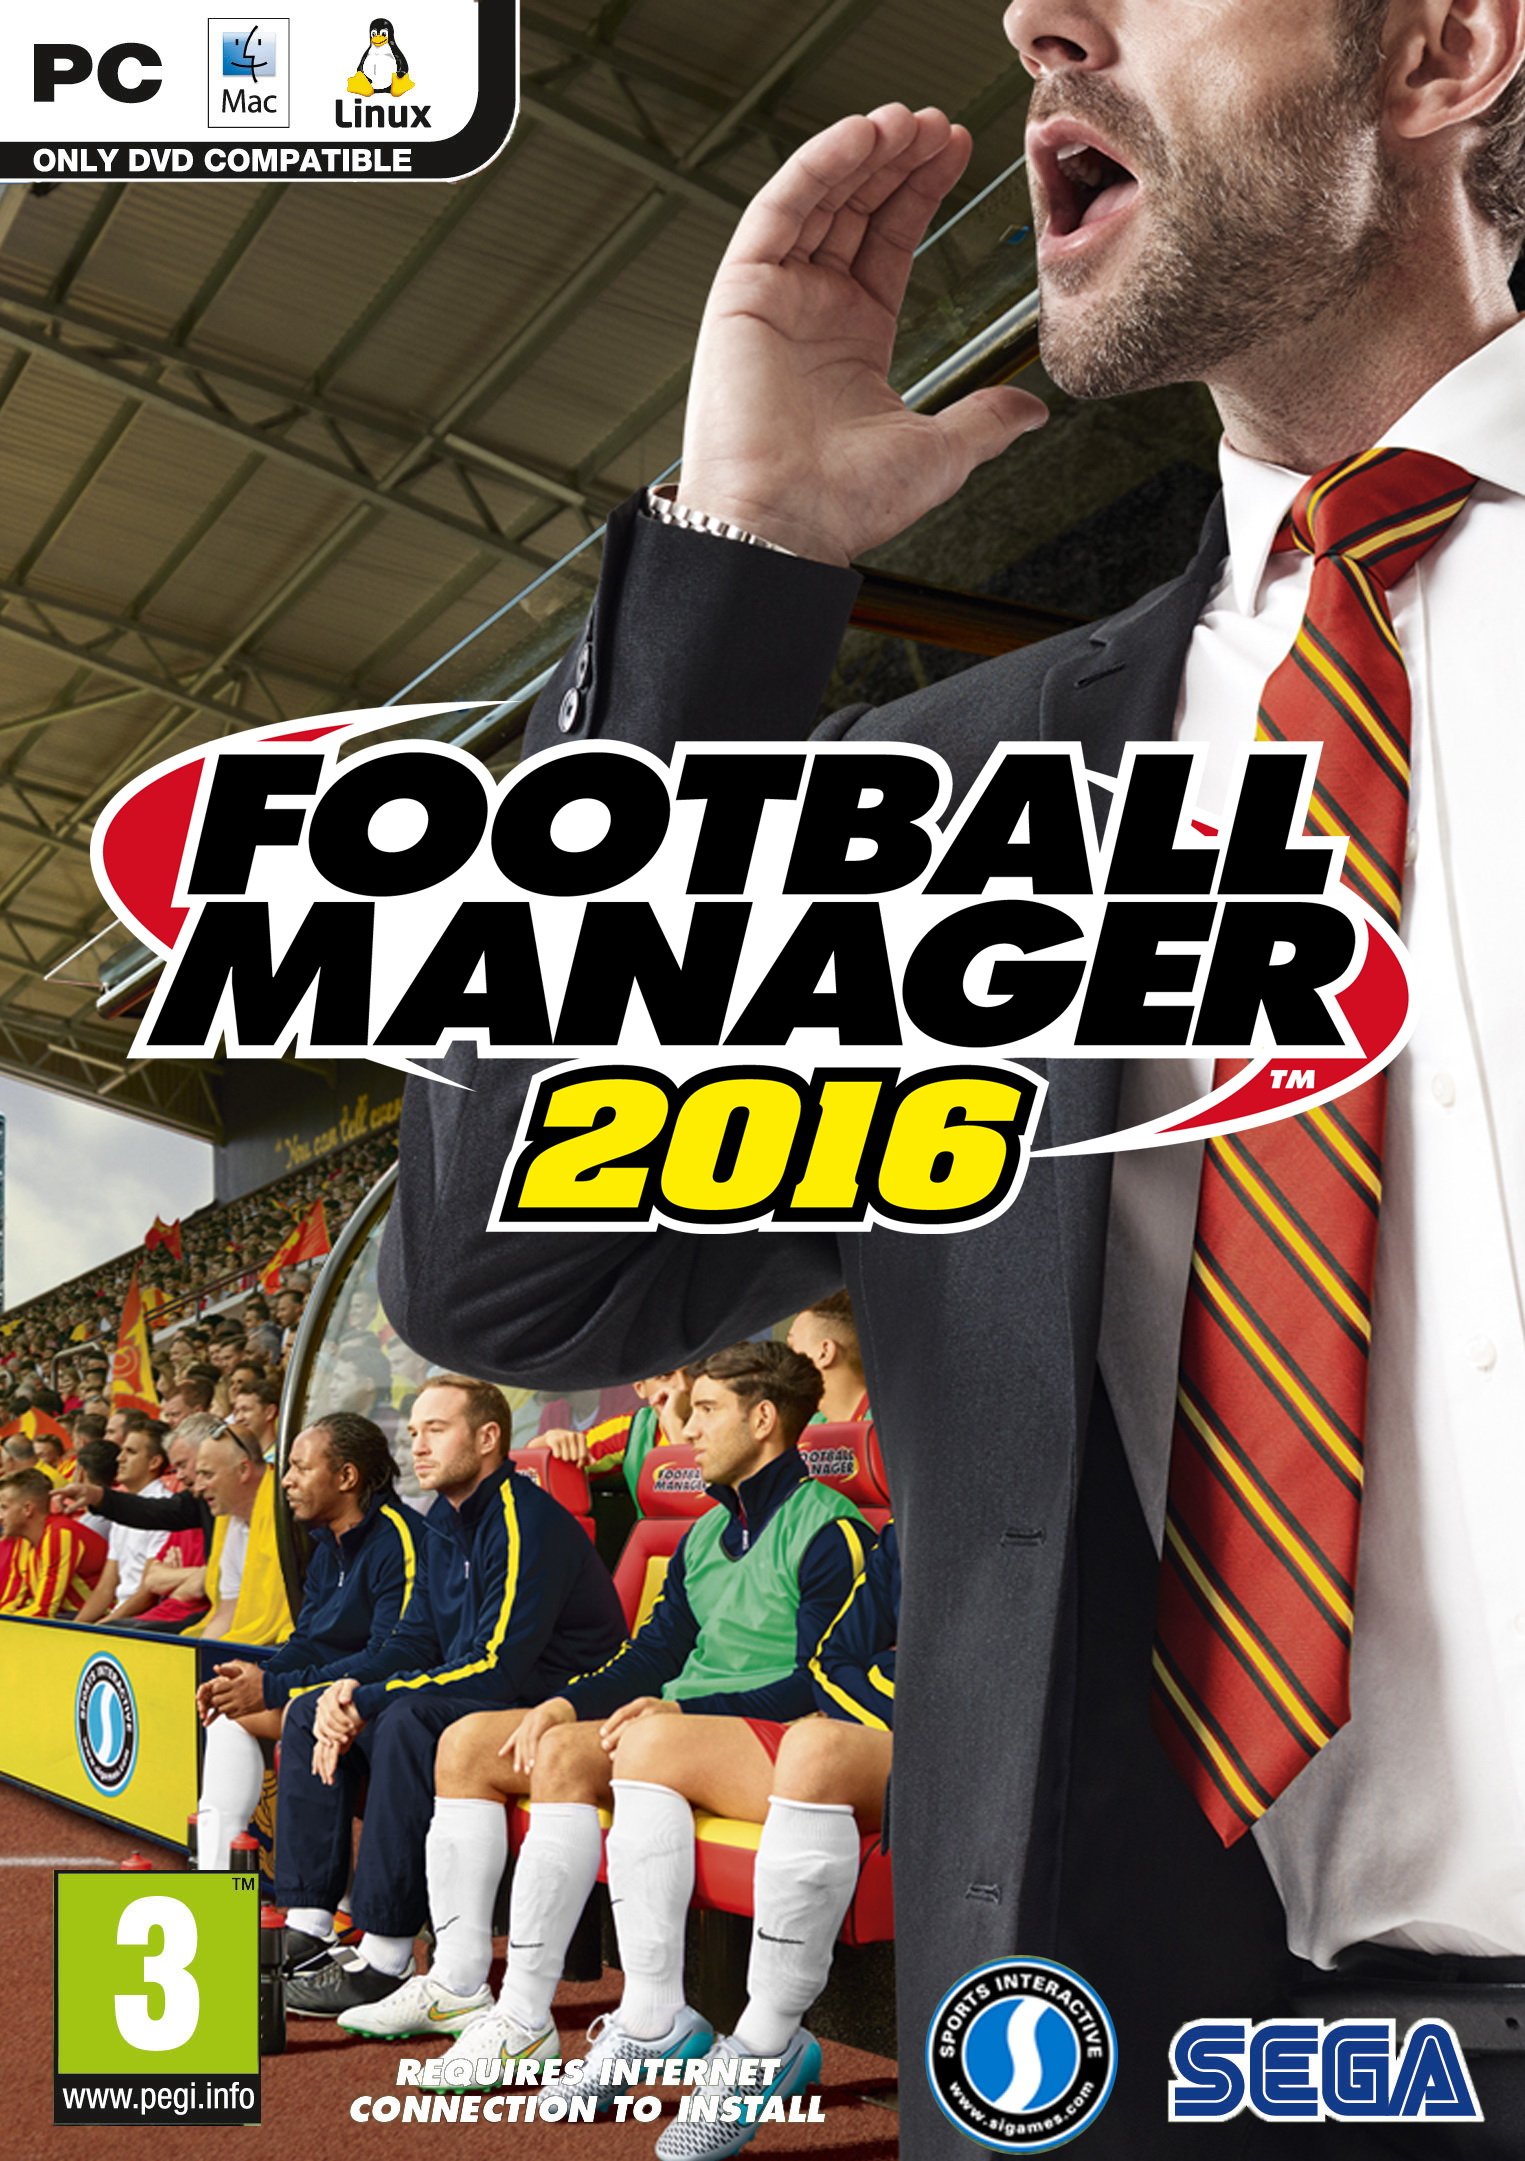 Image of Football Manager 2016